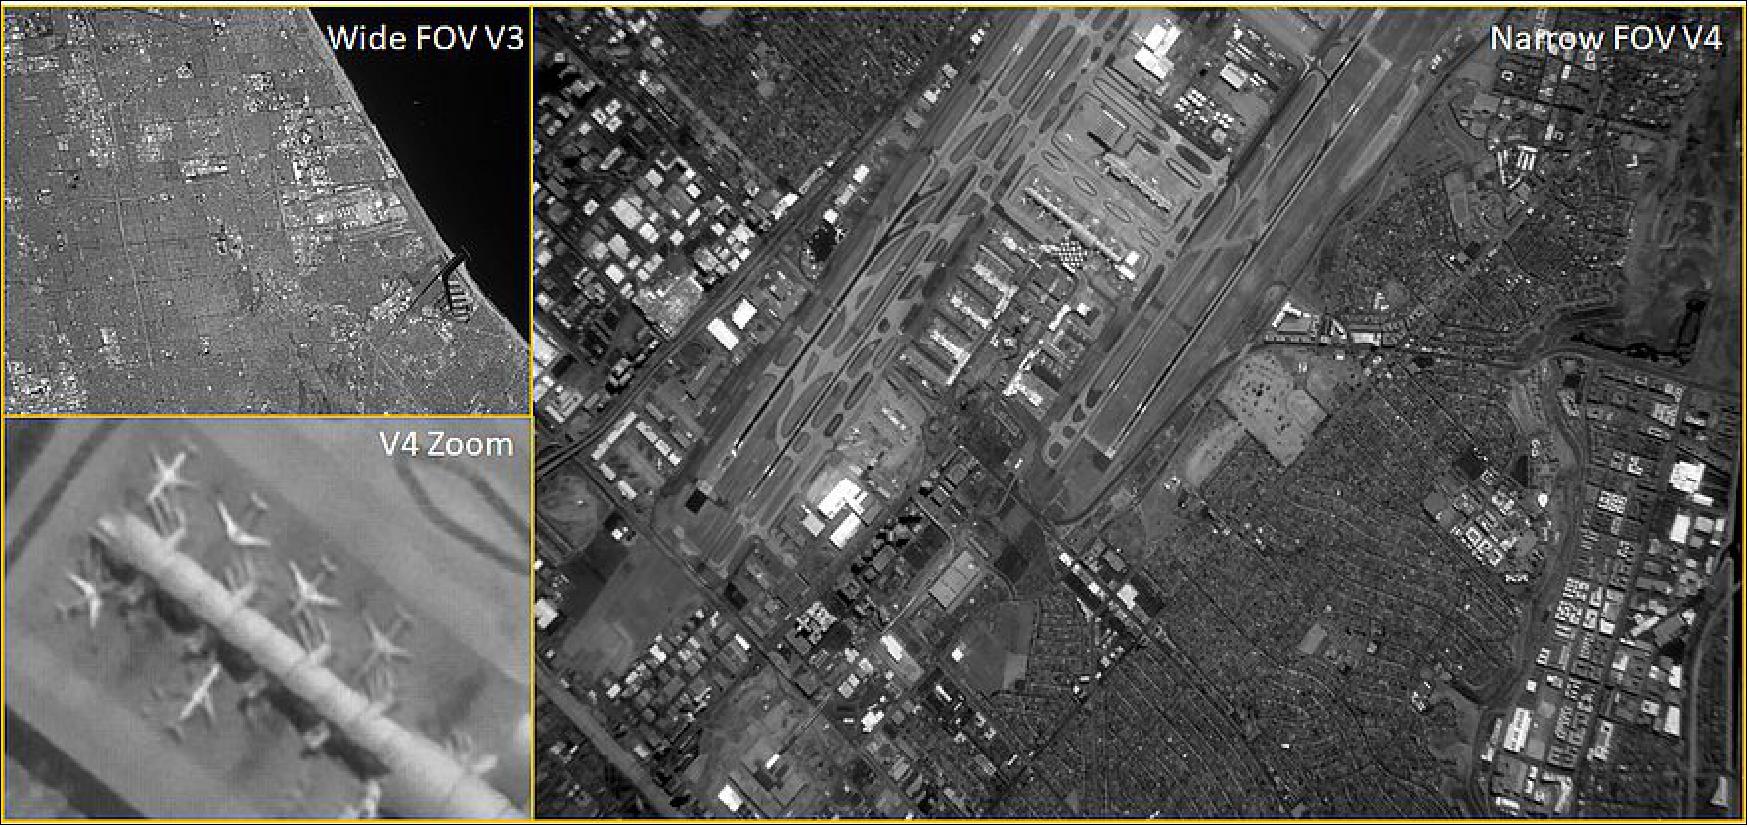 Figure 5: Tyvak-0130's GEOStare2 payload includes narrow and a wide field-of-view imagers. This images shows narrow and wide field-of-view images of Los Angeles International Airport as well as an image that zooms in on aircraft on the tarmac (image credit: Tyvak)